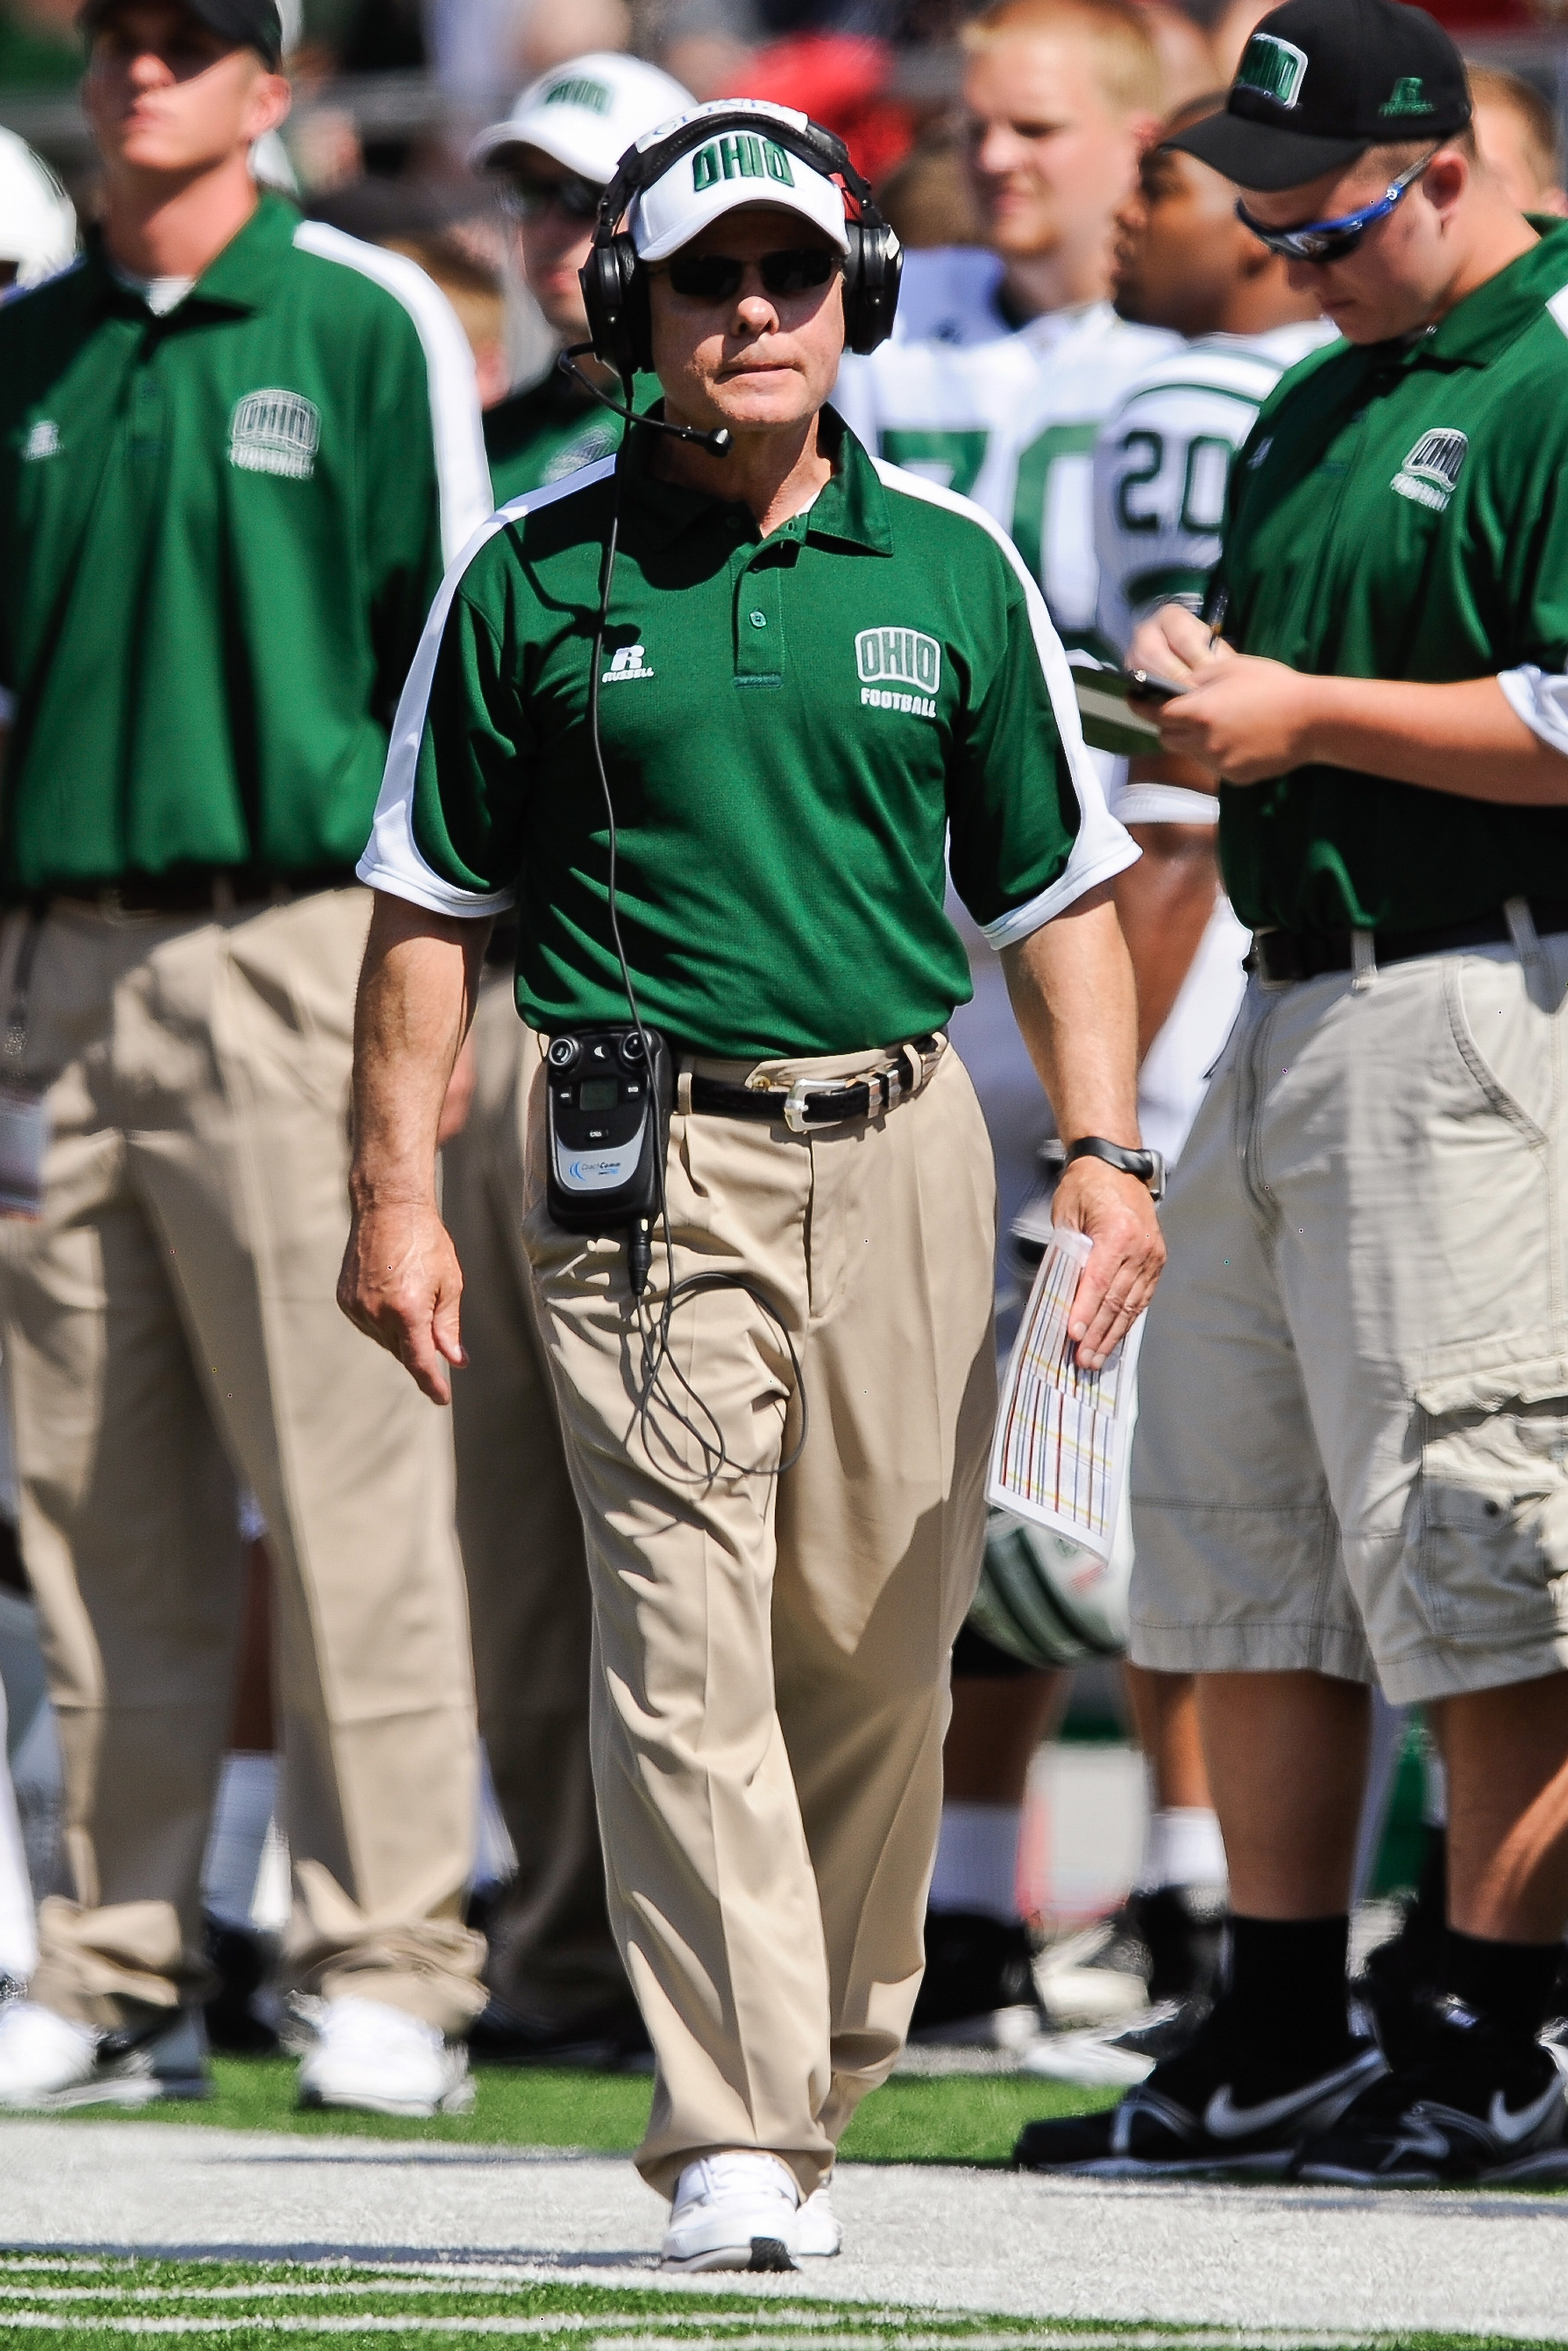 COLUMBUS, OH - SEPTEMBER 18:  Head Coach Frank Solich of the Ohio Bobcats watches his team play against the Ohio State Buckeyes at Ohio Stadium on September 18, 2010 in Columbus, Ohio.  (Photo by Jamie Sabau/Getty Images)